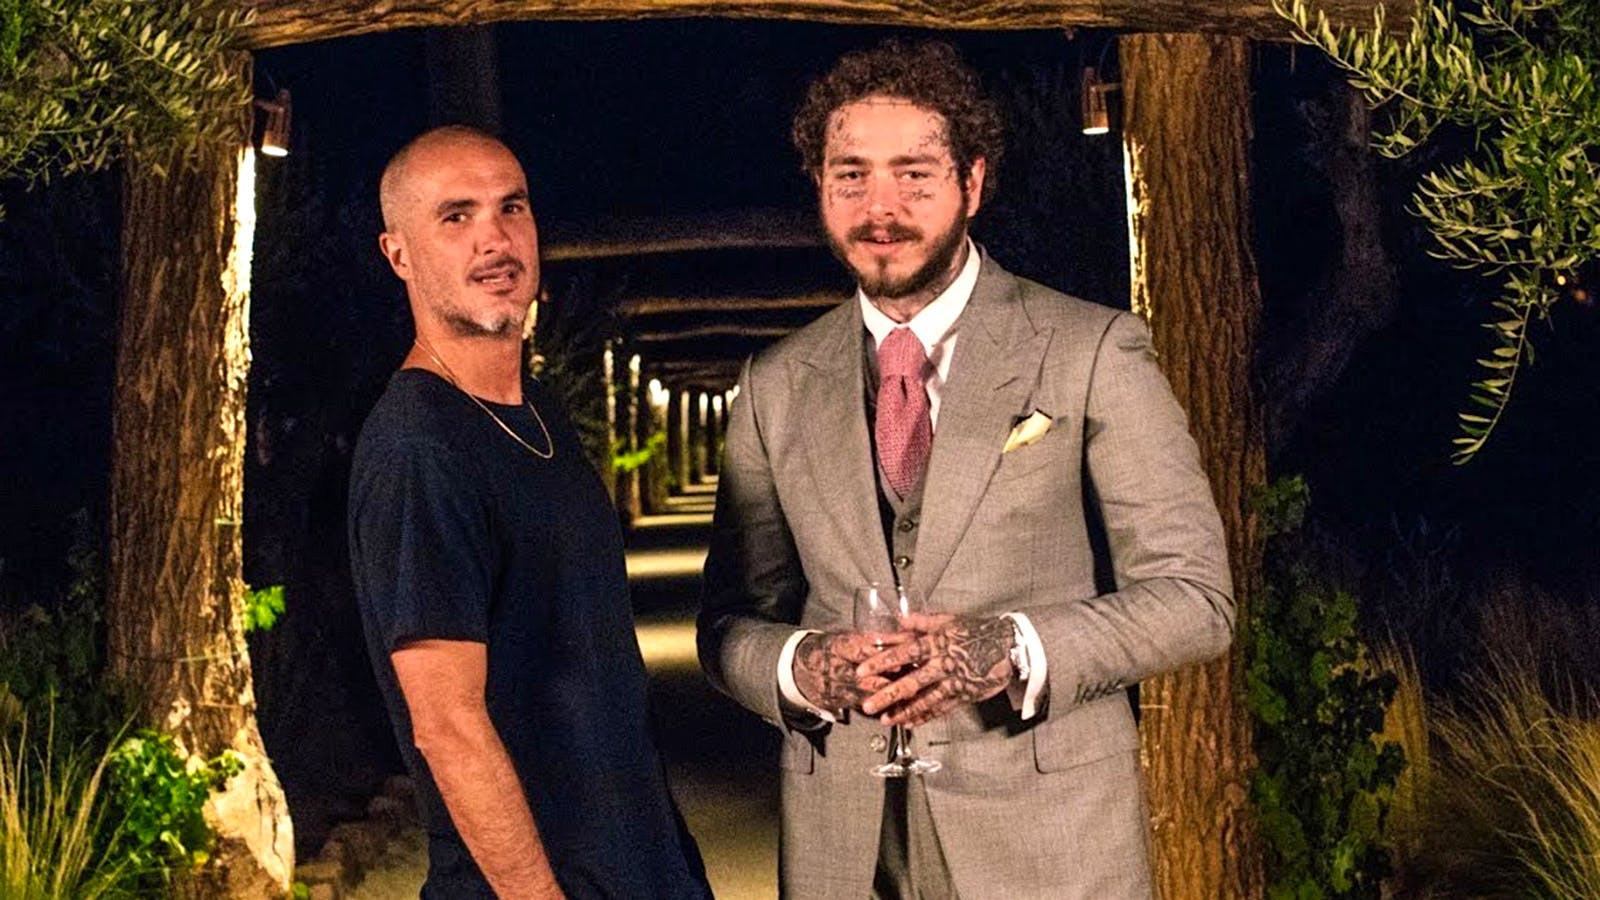 Post Malone (right) samples France with Zane Lowe.